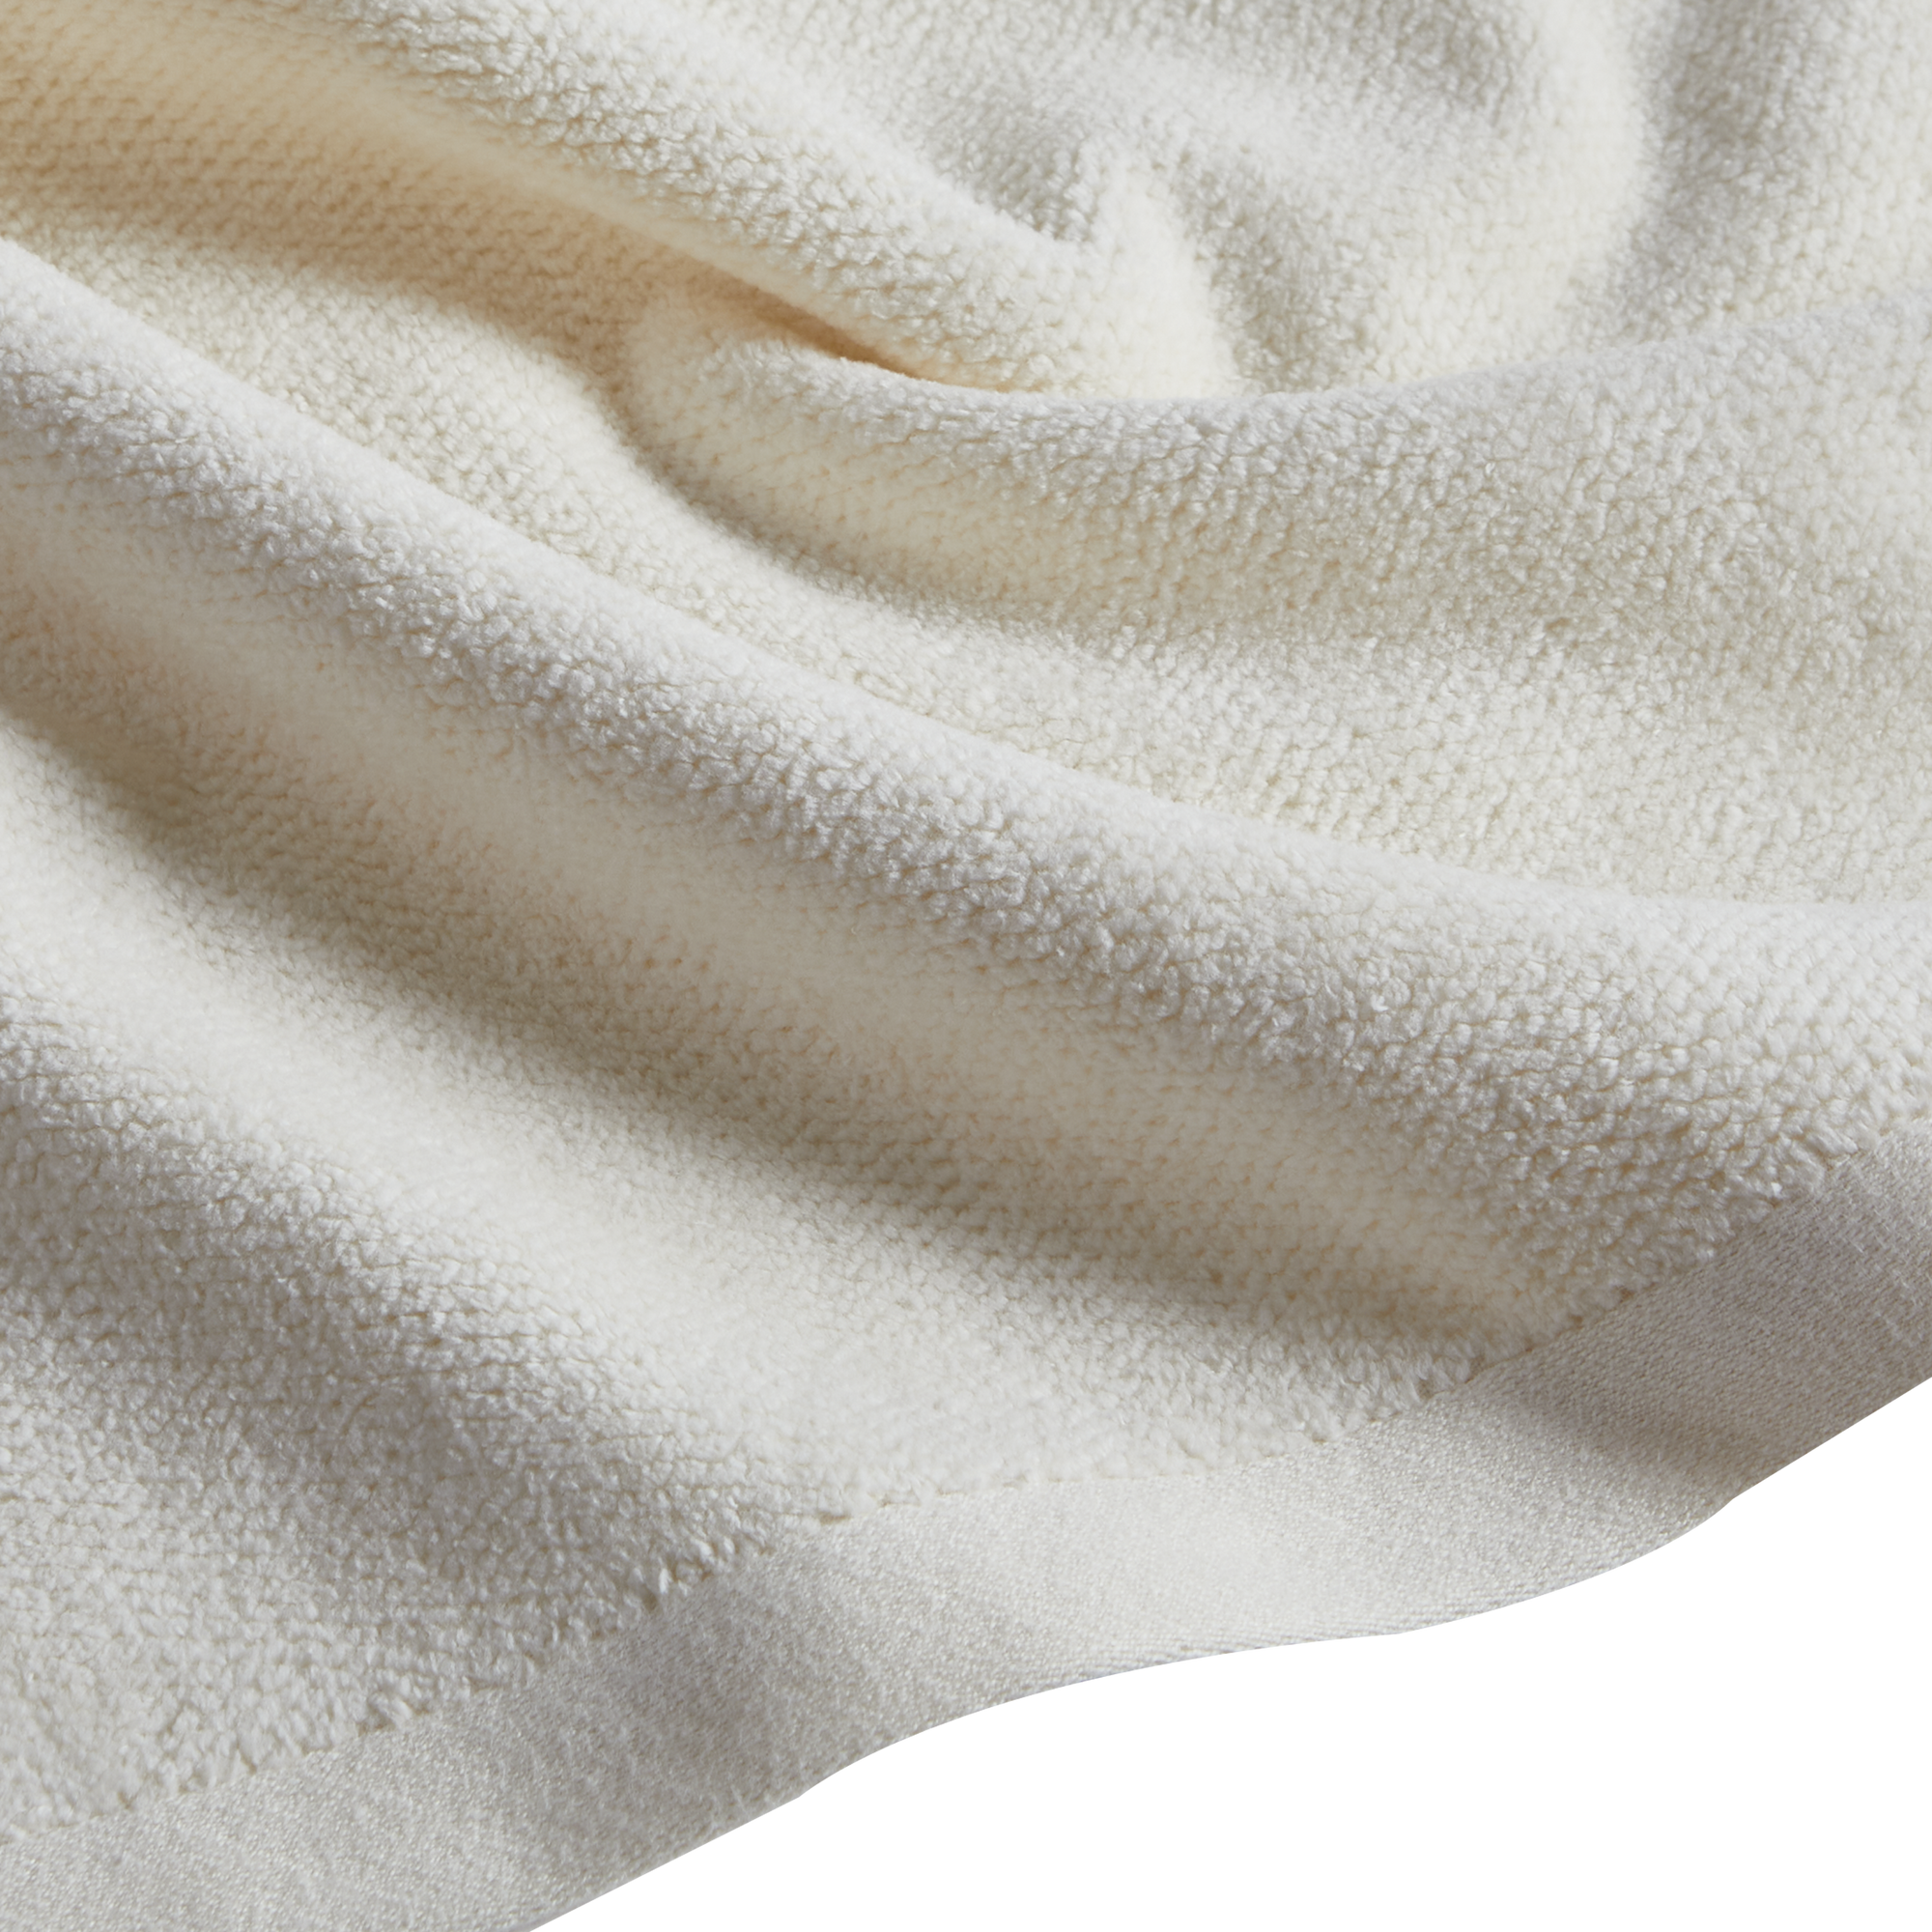 Take comfort in the luxurious feel of Velour towels: its subtle diamond-weave velour is backed with absorbent terrycloth to swaddle you in style—morning, noon, on night.